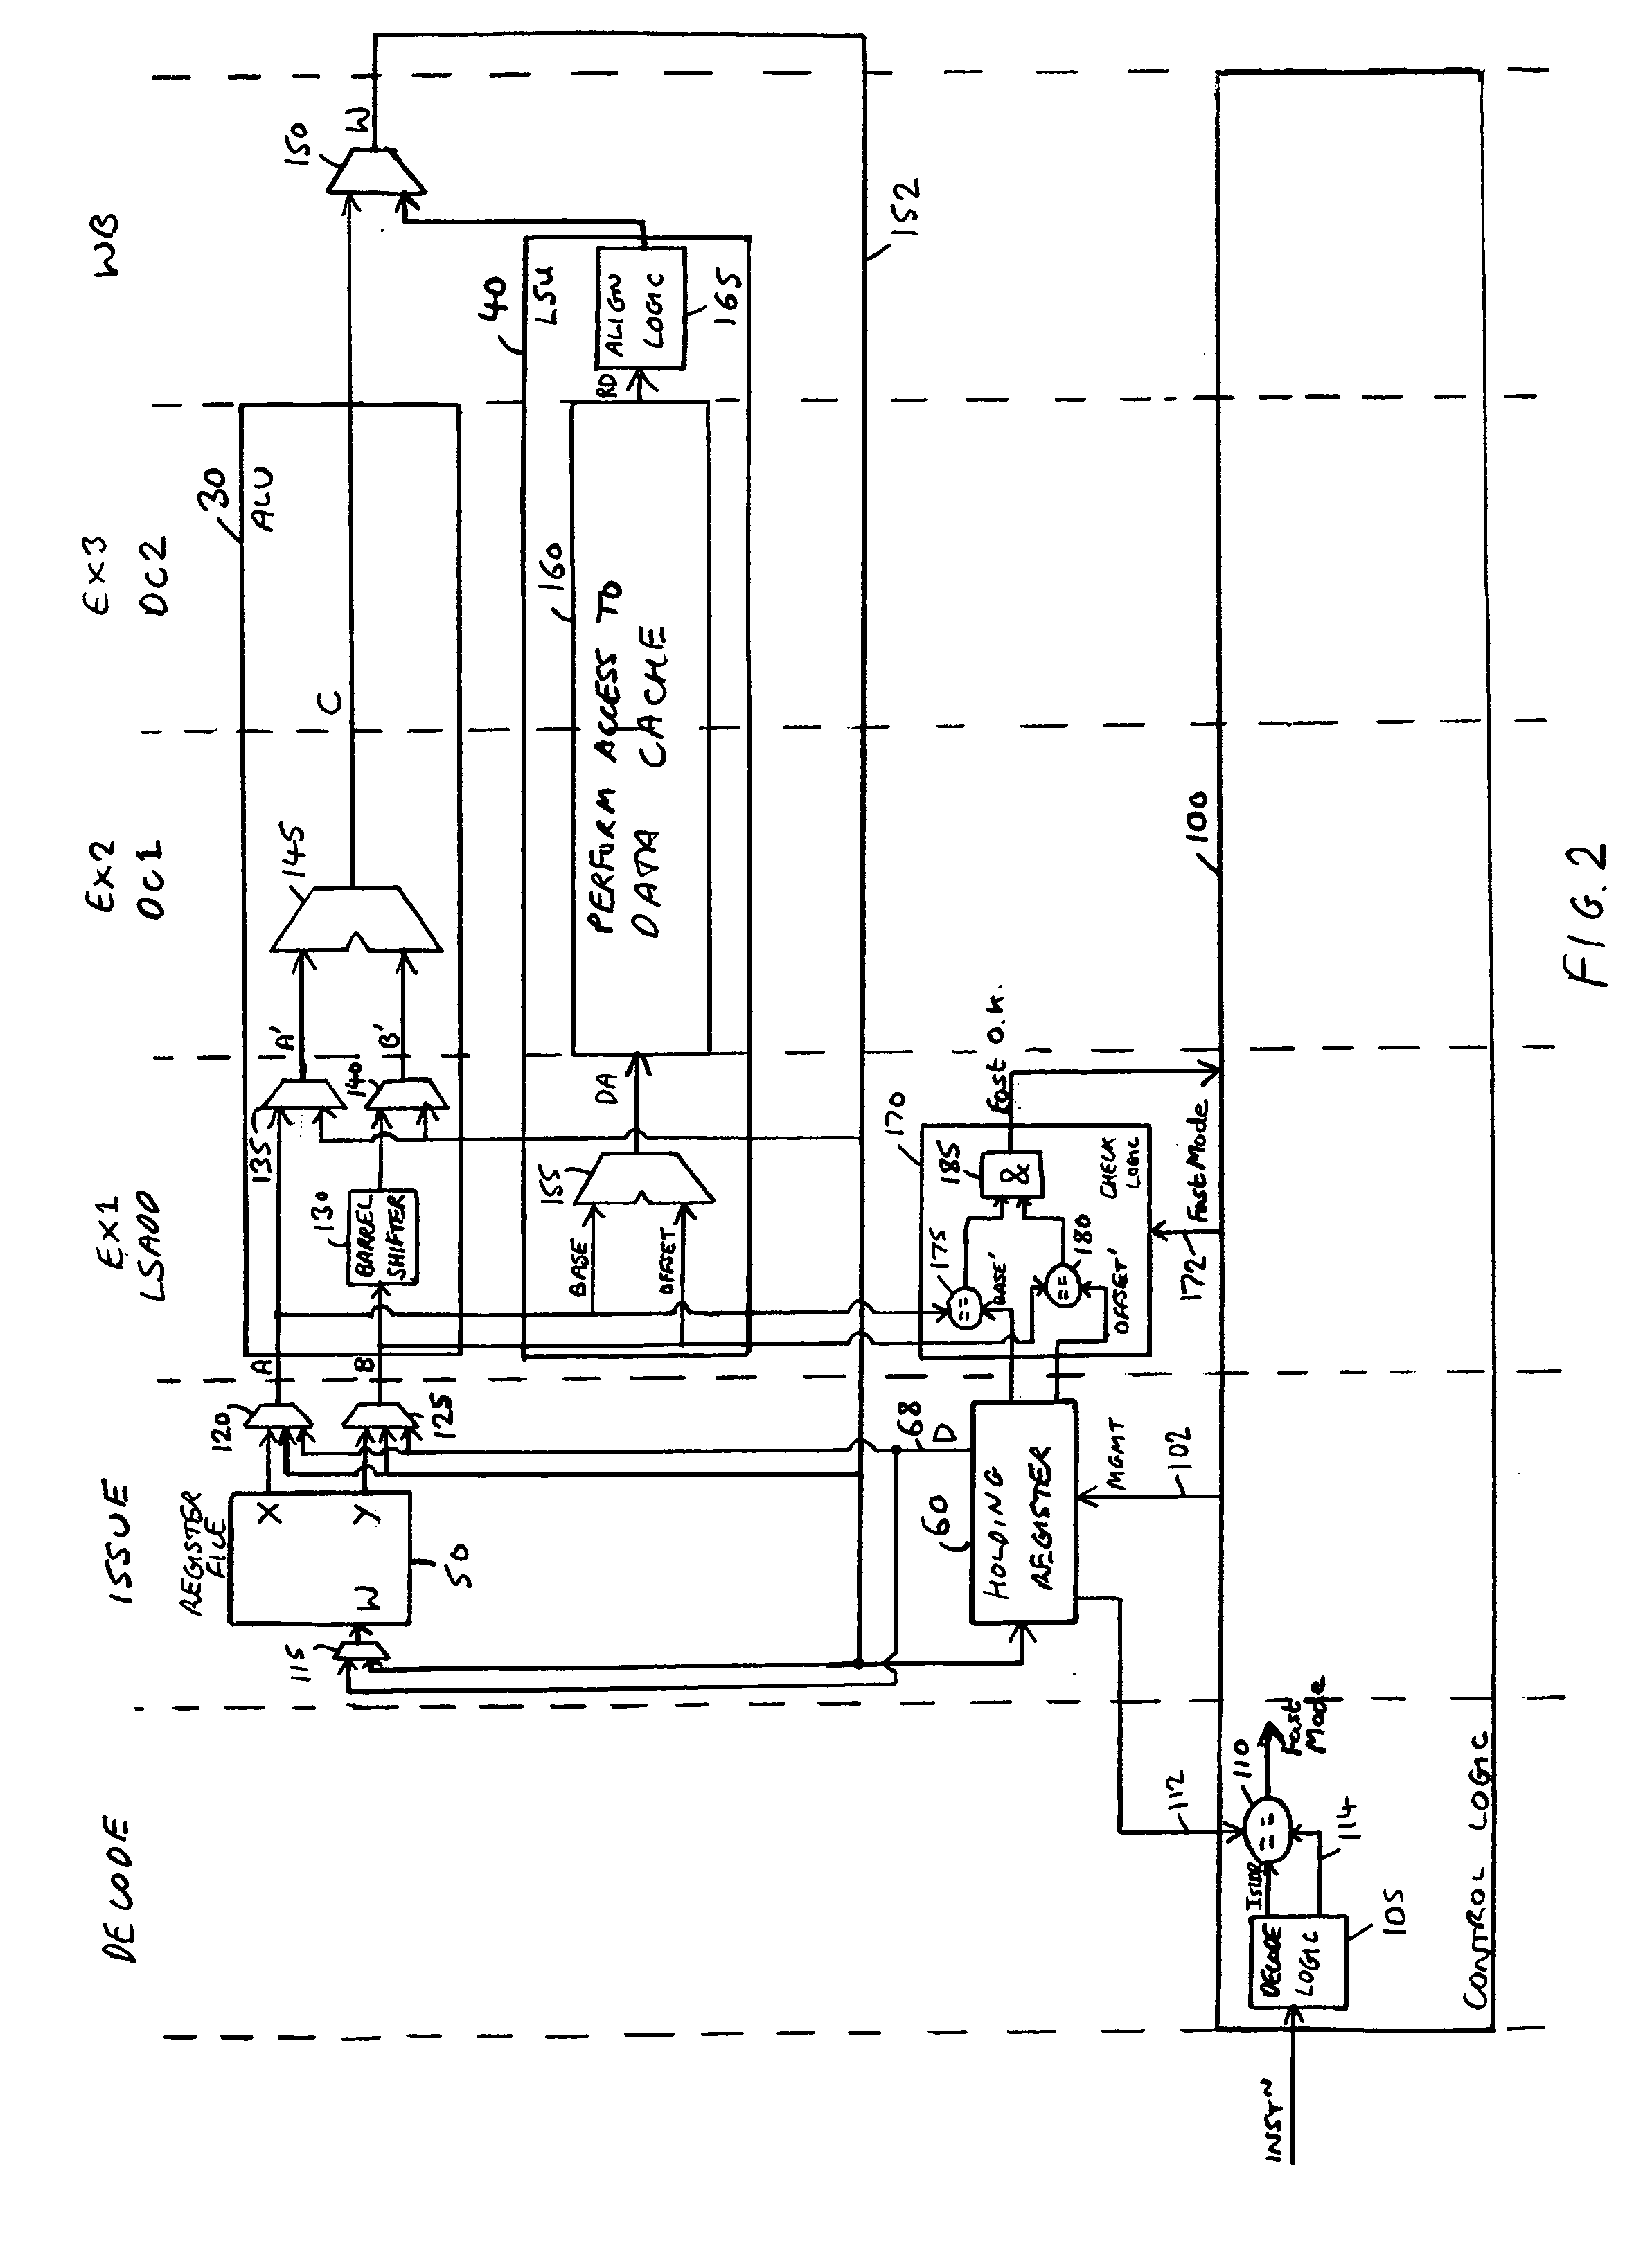 Apparatus and method for loading data values